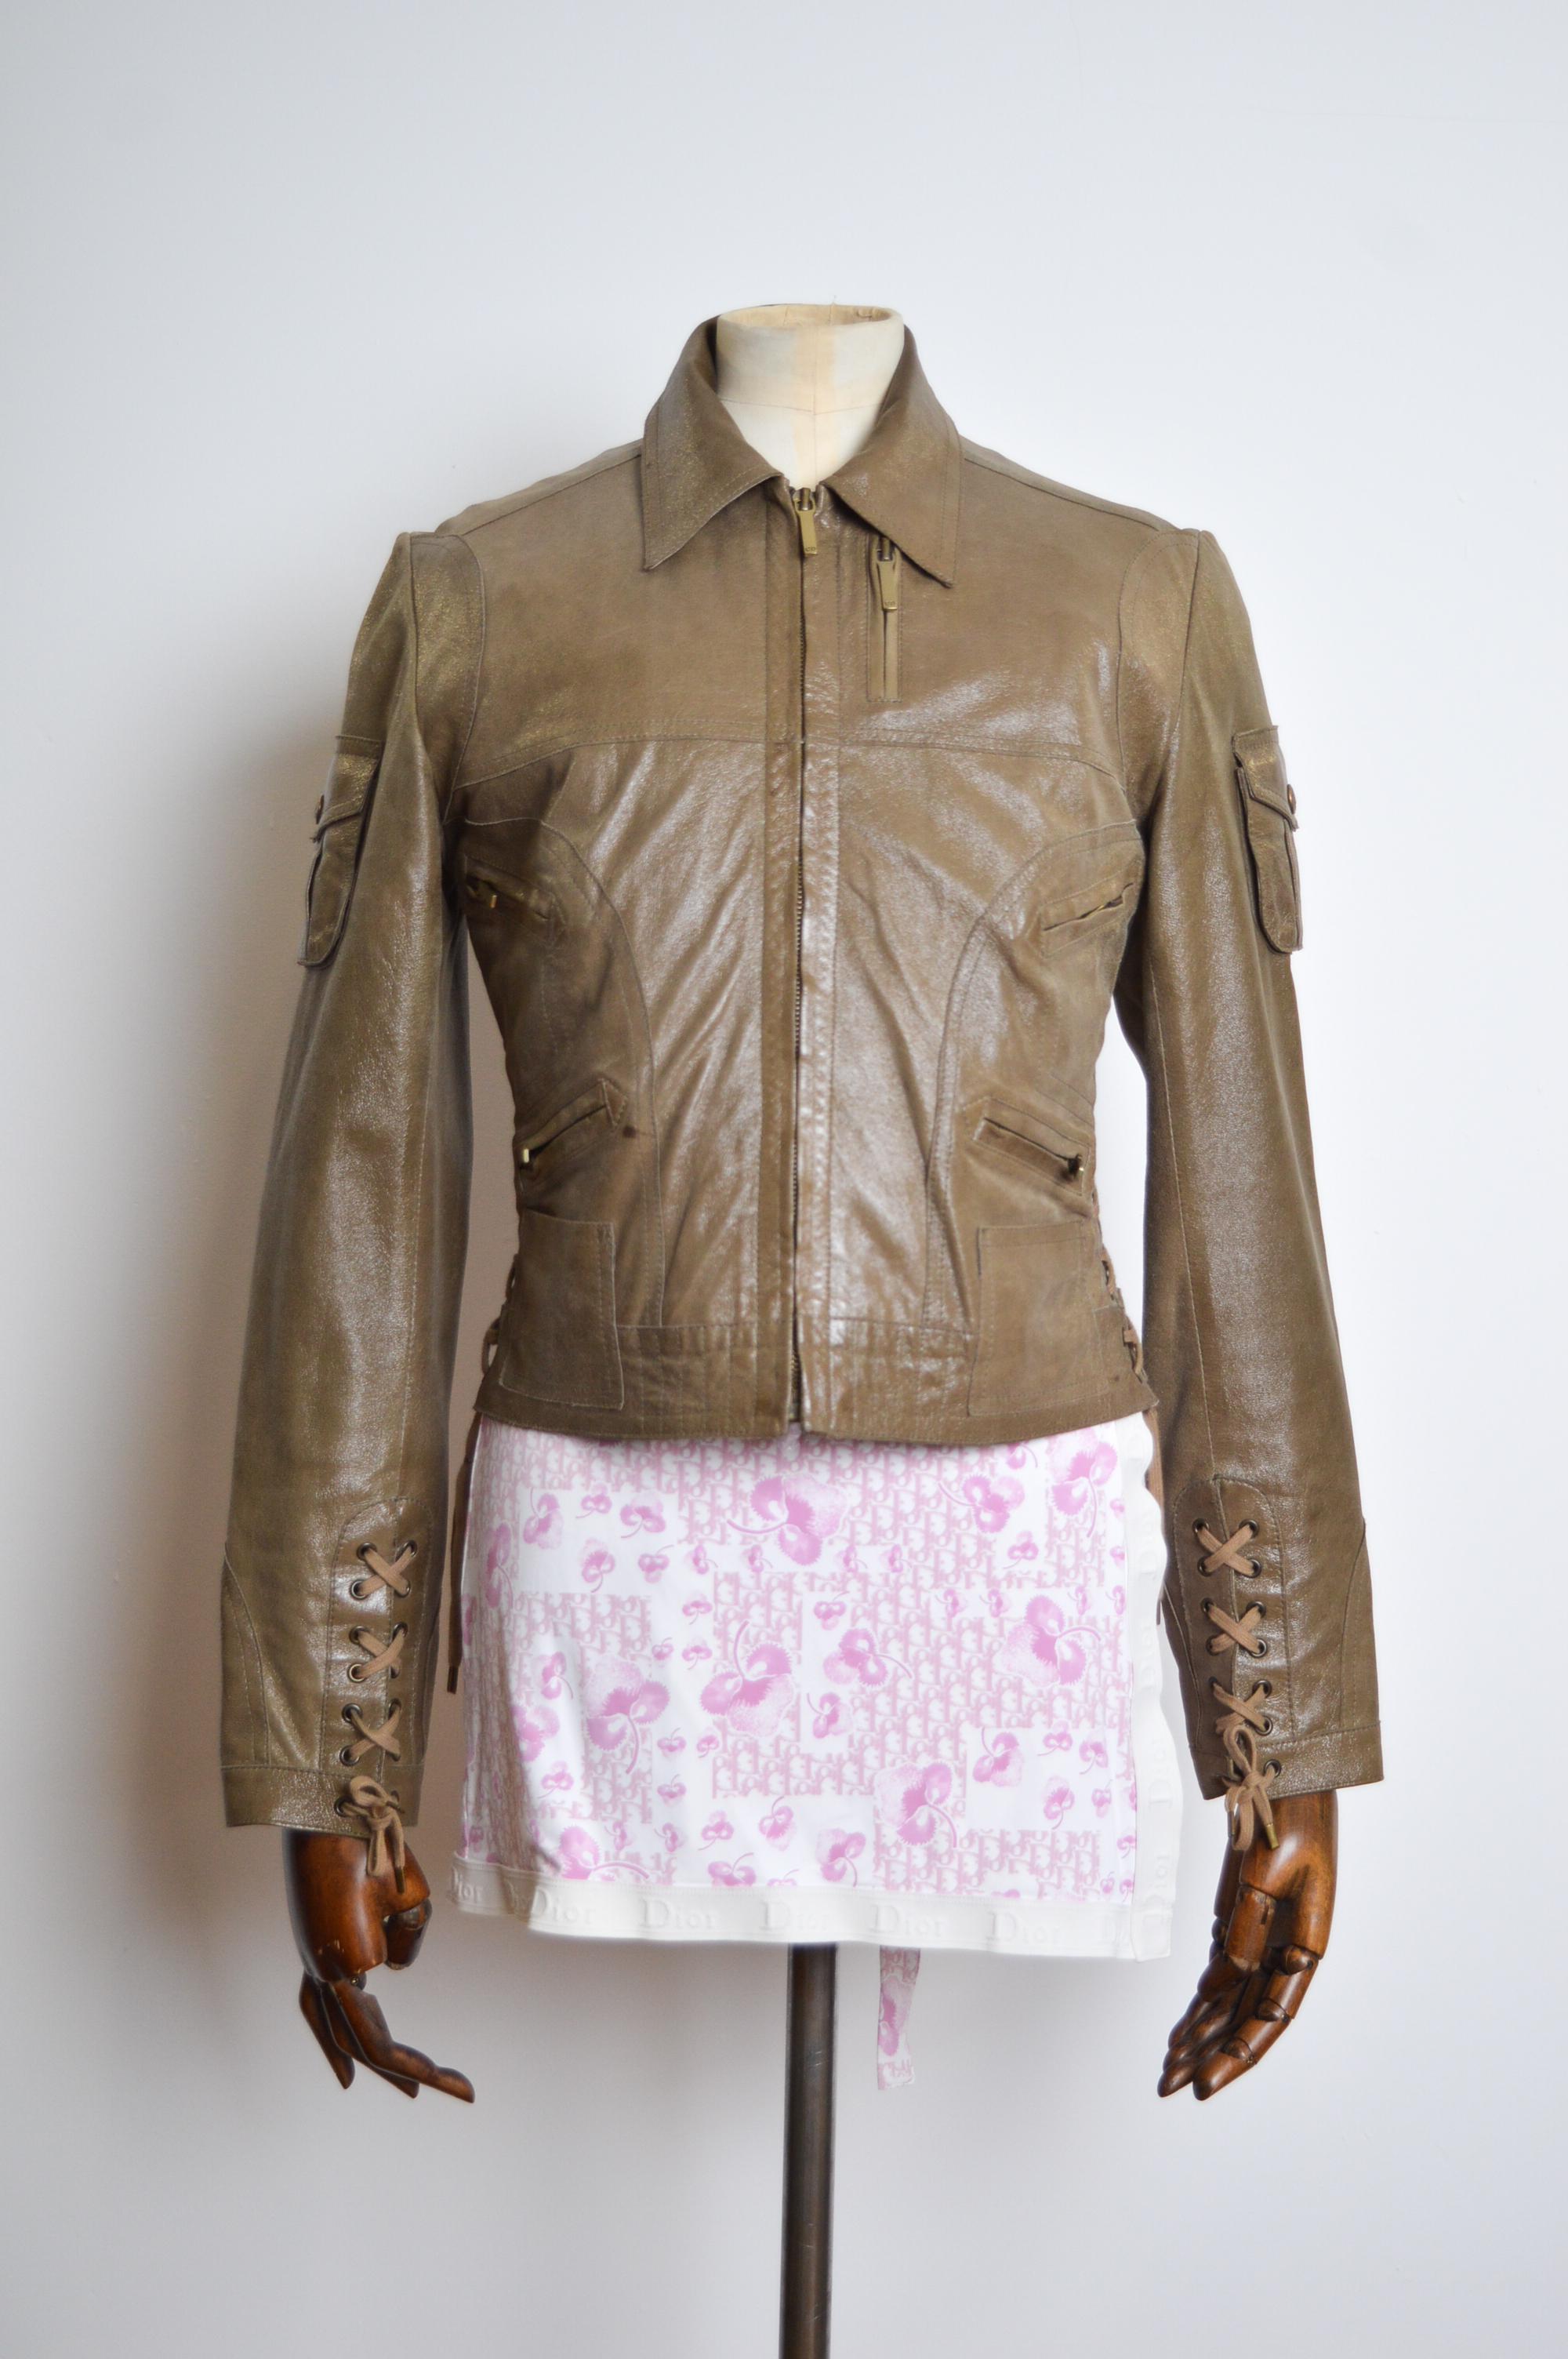 Fall / Winter 2002 Christian Dior by John Galliano Leather Jacket, crafted from a khaki green leather with corset style lace up detailing.

MADE IN FRANCE 

100% Goat Leather / 100% Silk lining.

Measurements in Inches - 
Pit to Pit -18